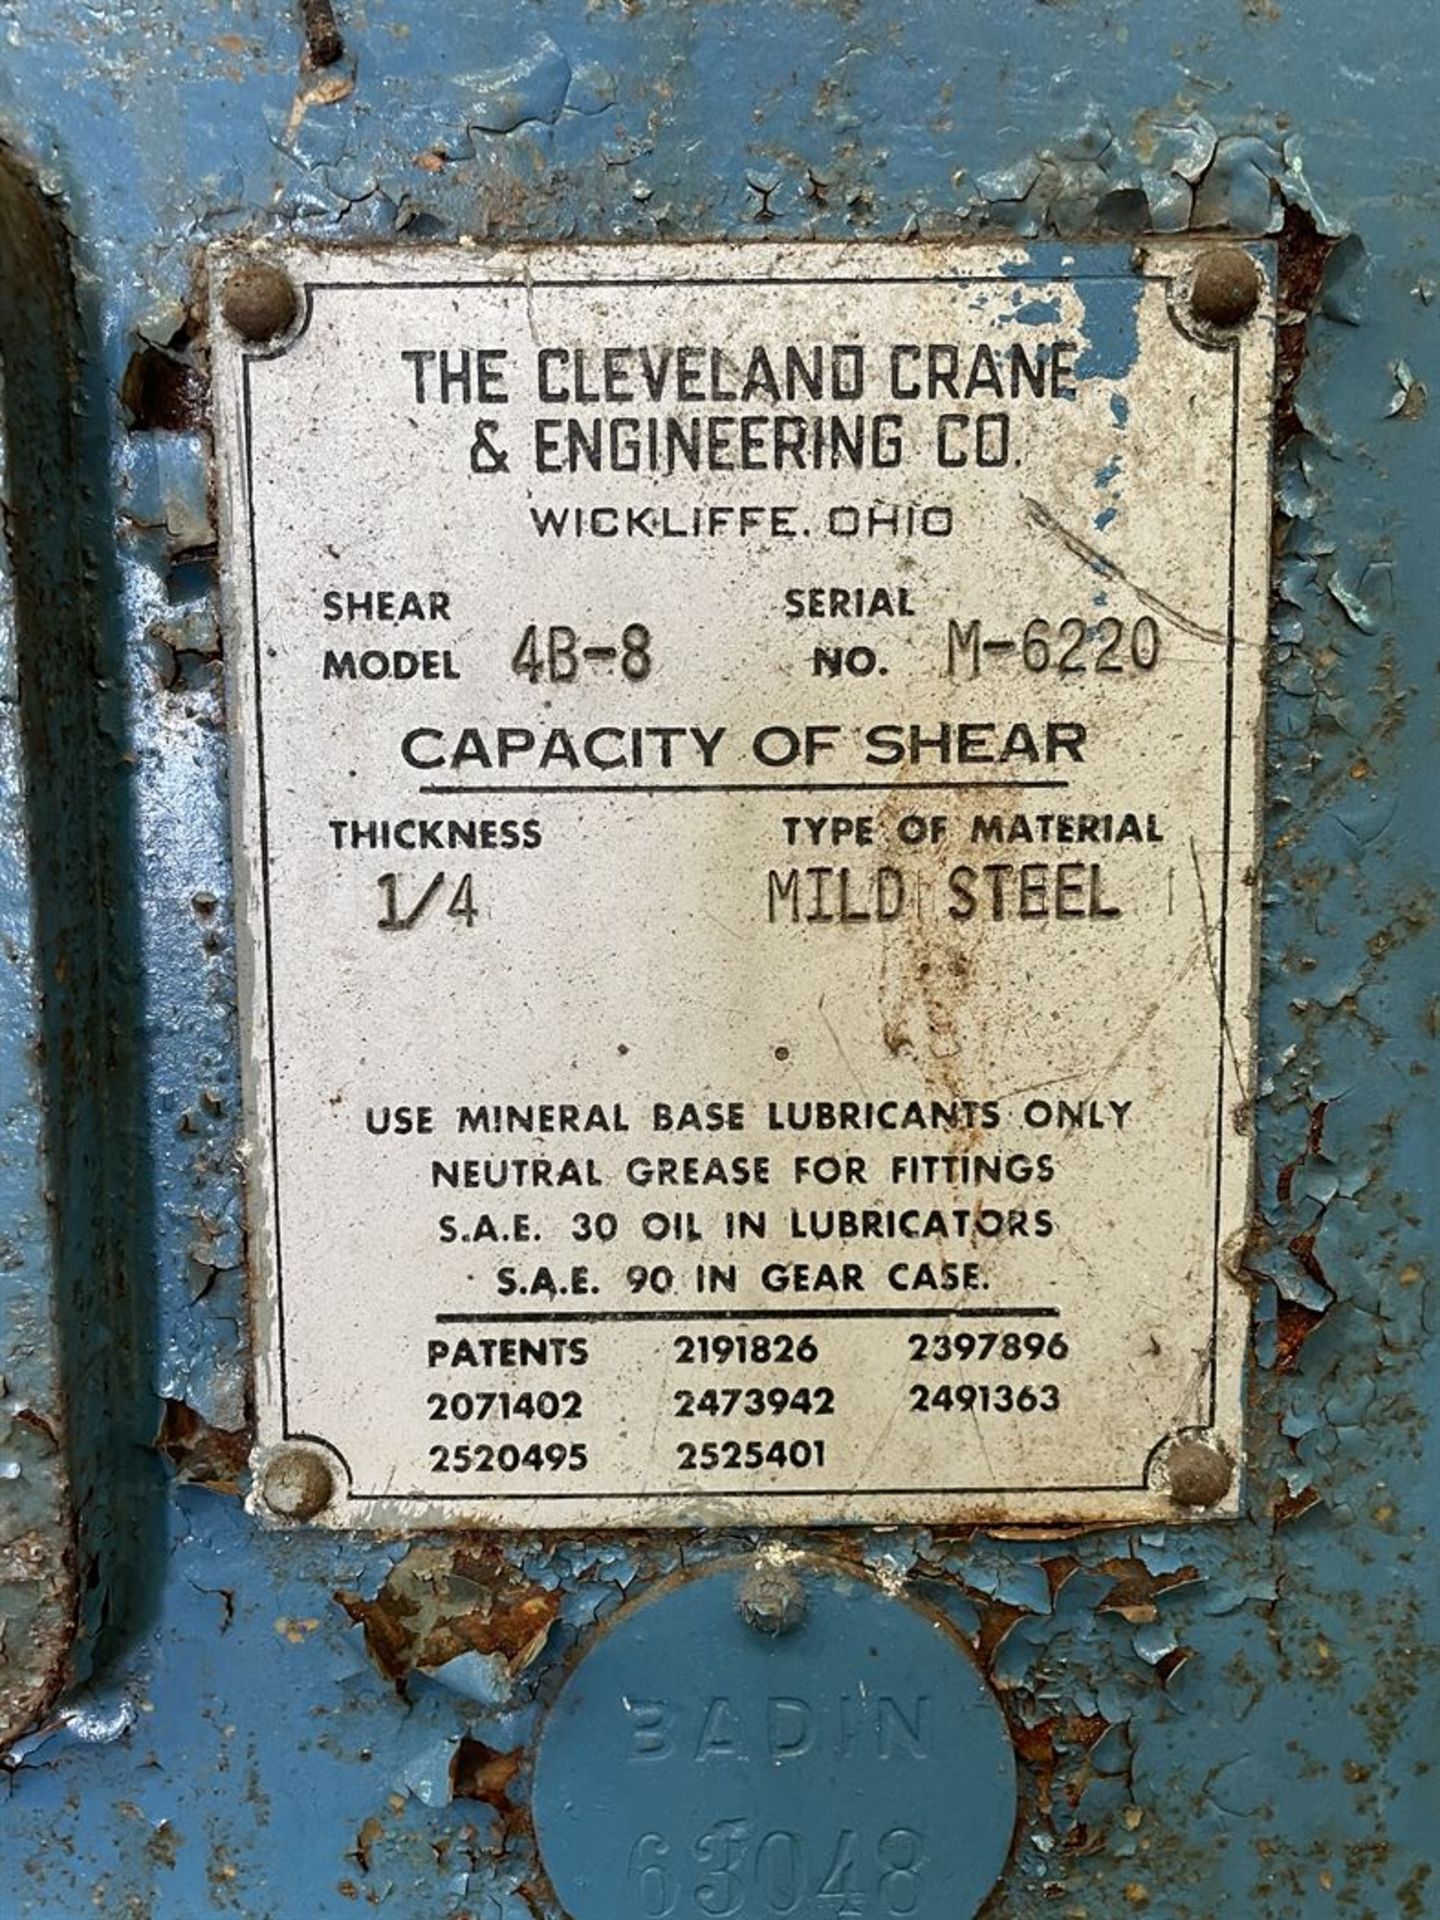 STEELWELD 4B-8 Shear, s/n M-6220, 8' x 1/4" (Condition Unknown) - Image 5 of 5